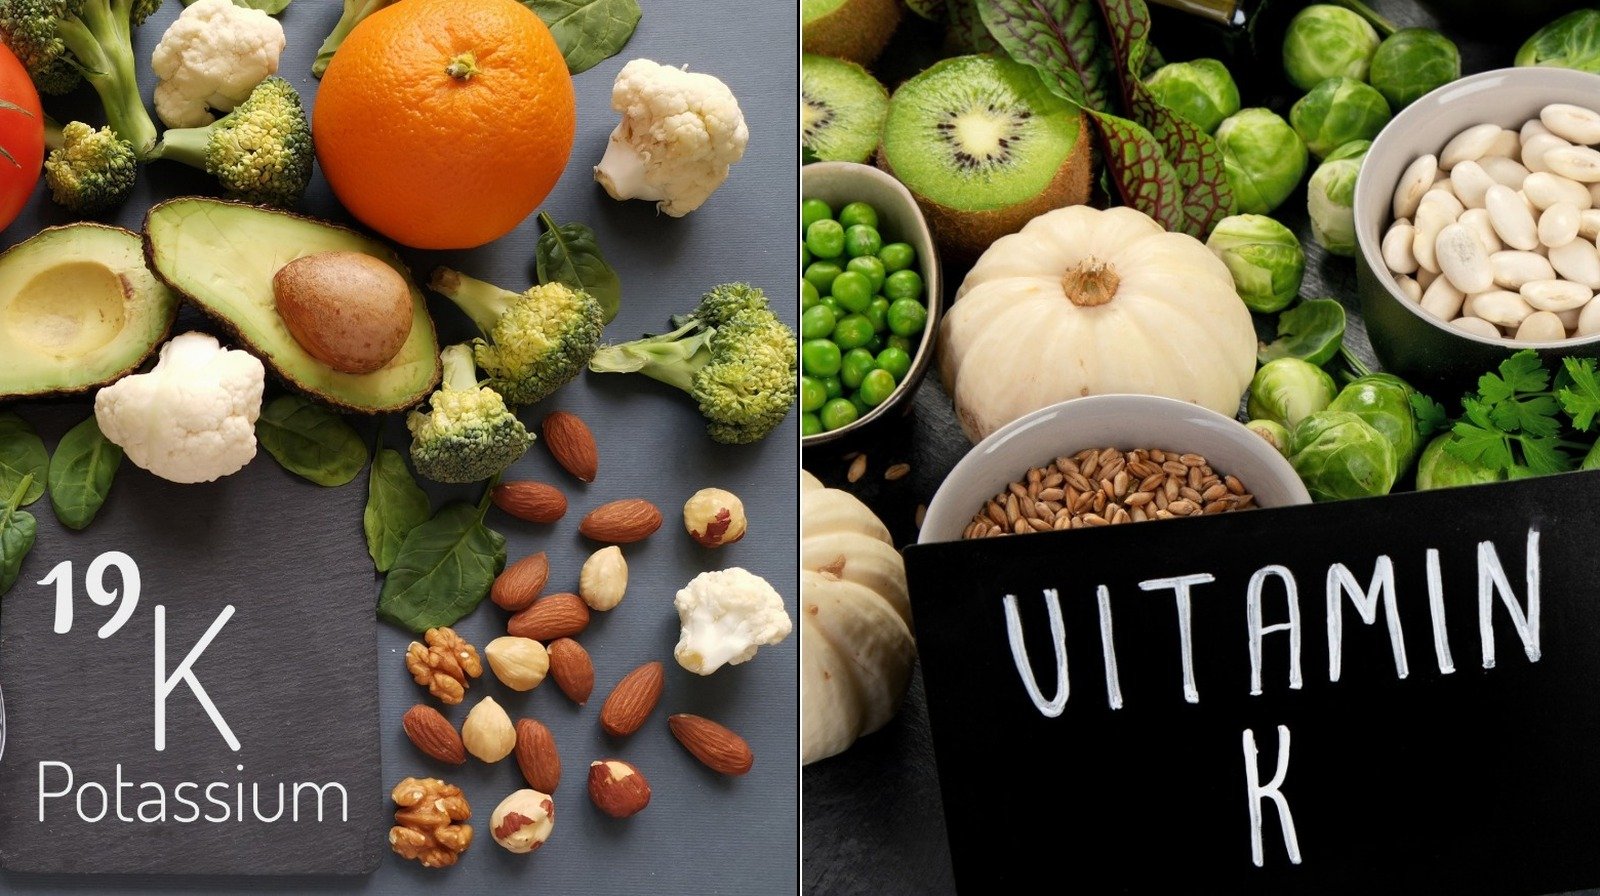 Are Vitamin K And Potassium The Same Thing?